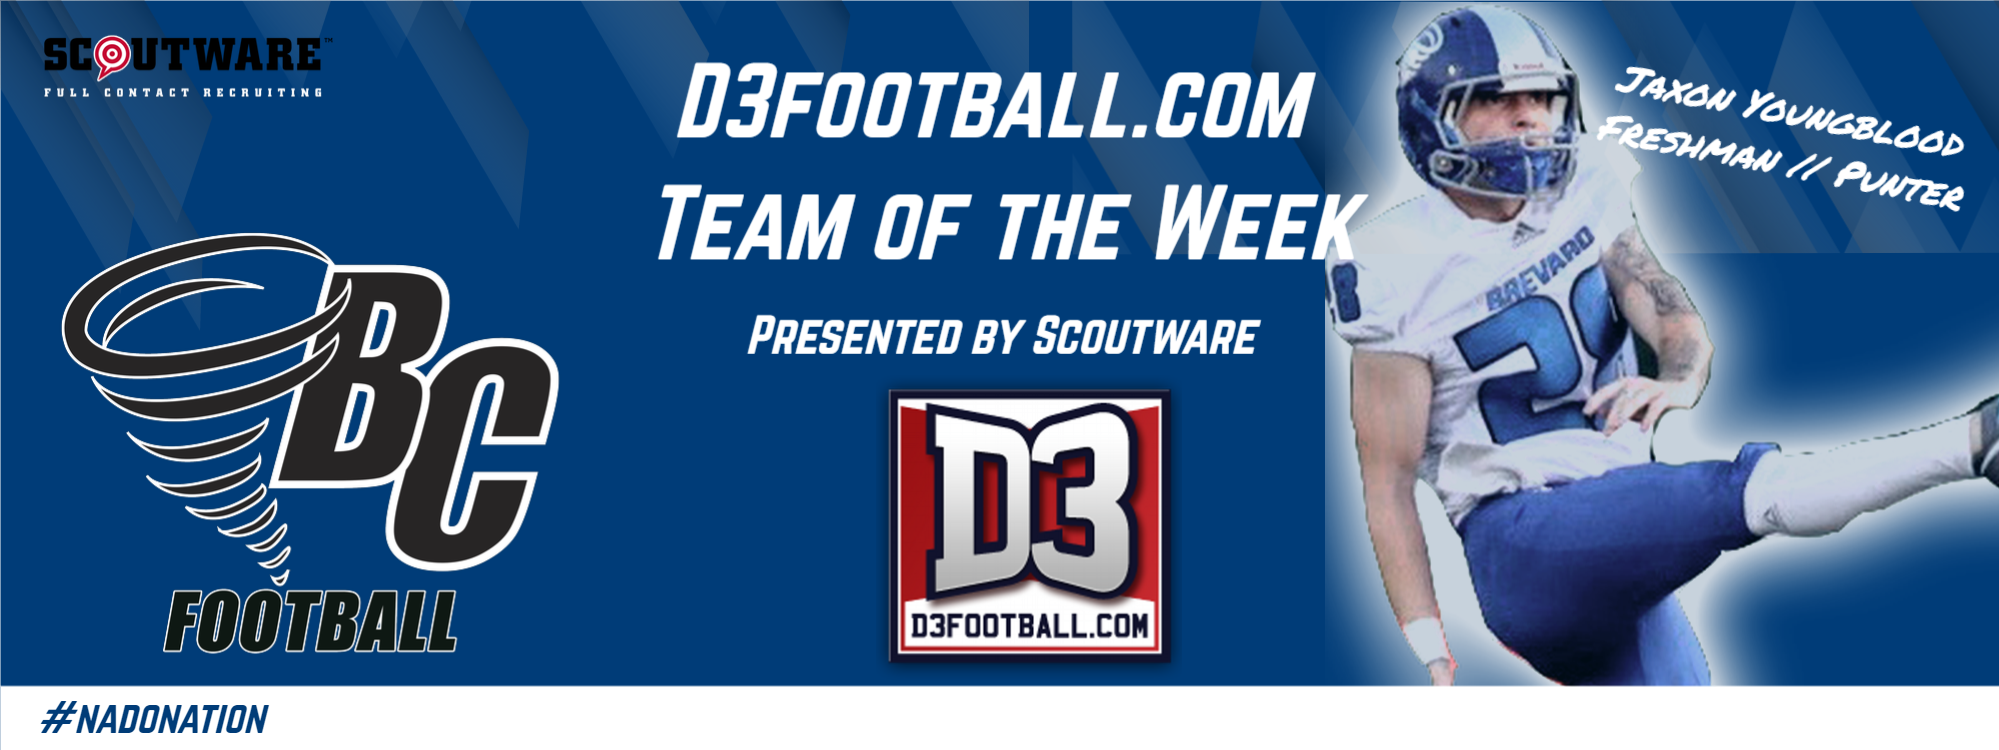 Brevard’s Jaxon Youngblood Selected to D3football.com Team of the Week